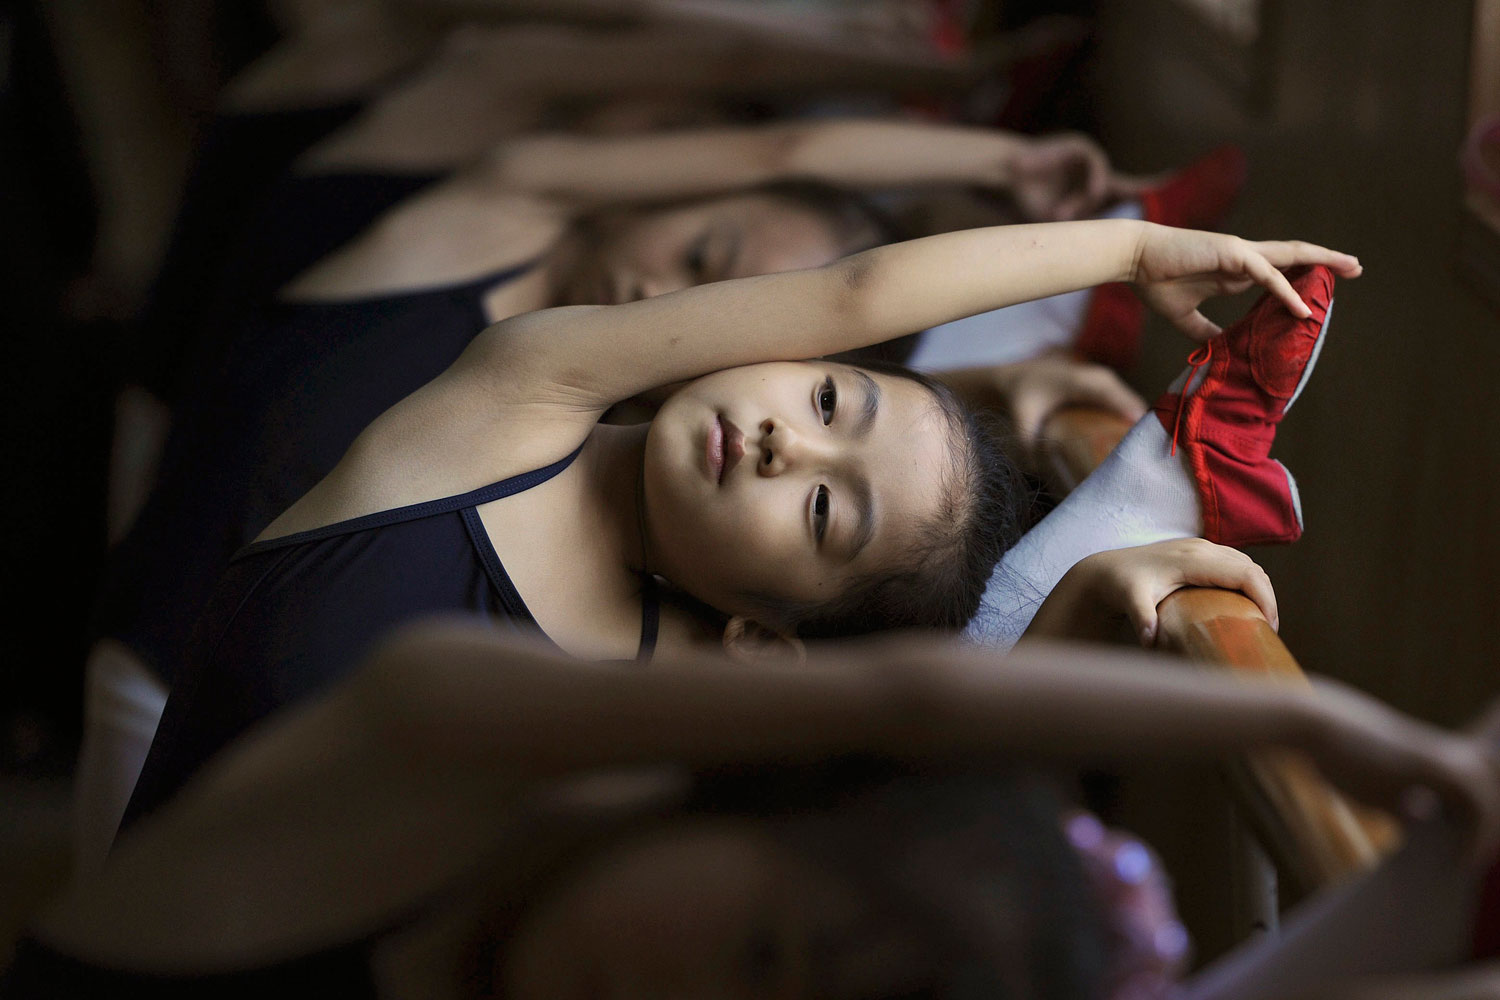 July 9, 2011. Children stretch during a ballet lesson at a dancing school in Hefei, Anhui province, China.